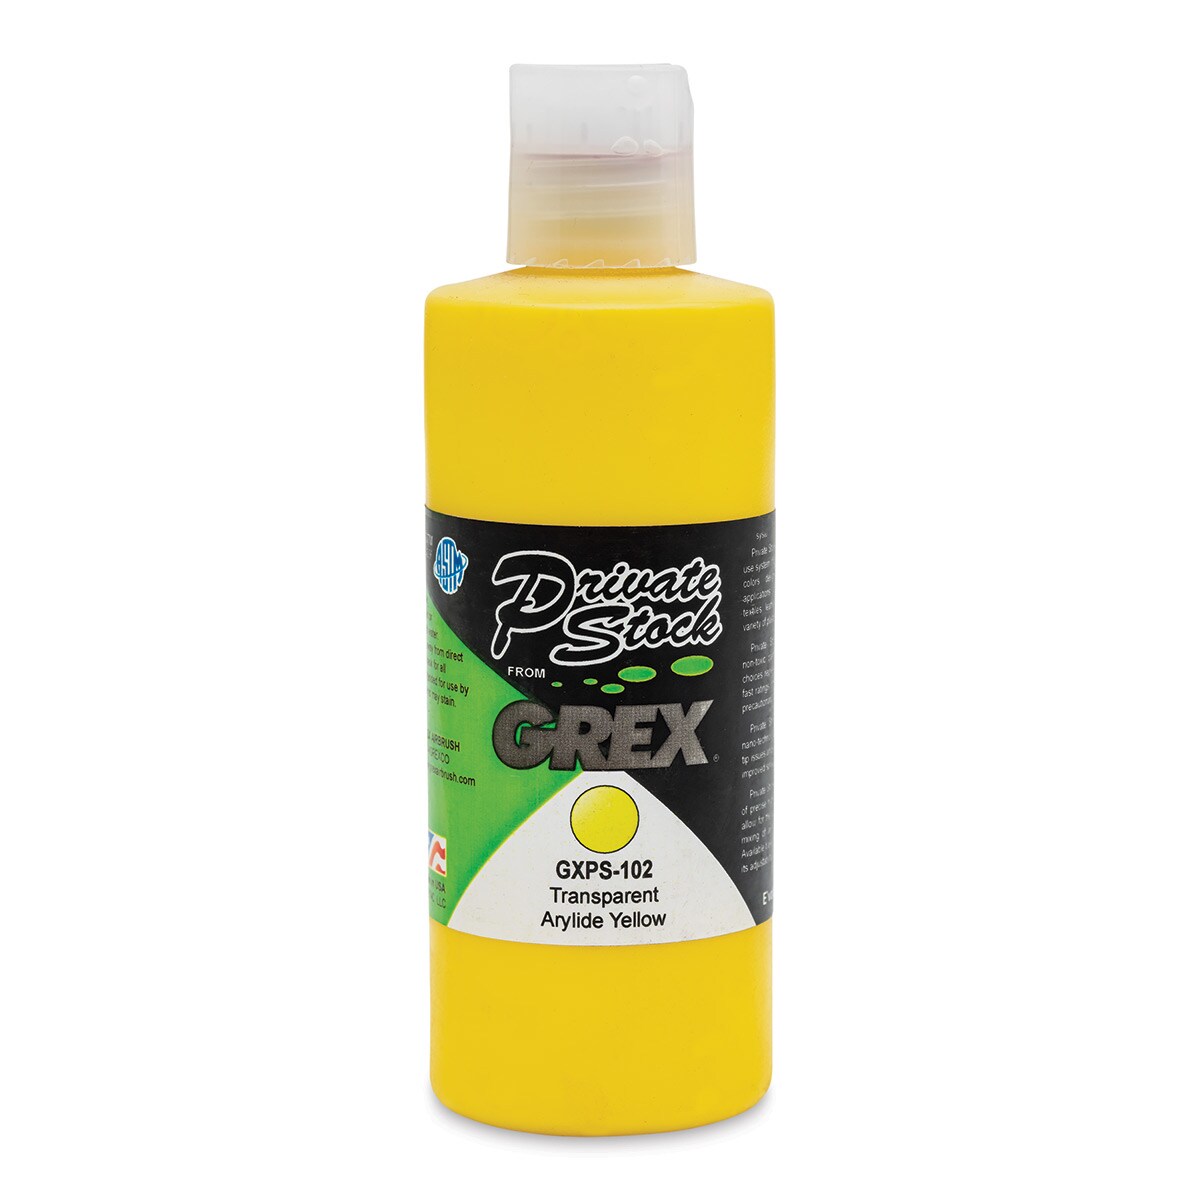 Grex Private Stock Airbrush Color - Transparent Arylide Yellow, 4 oz